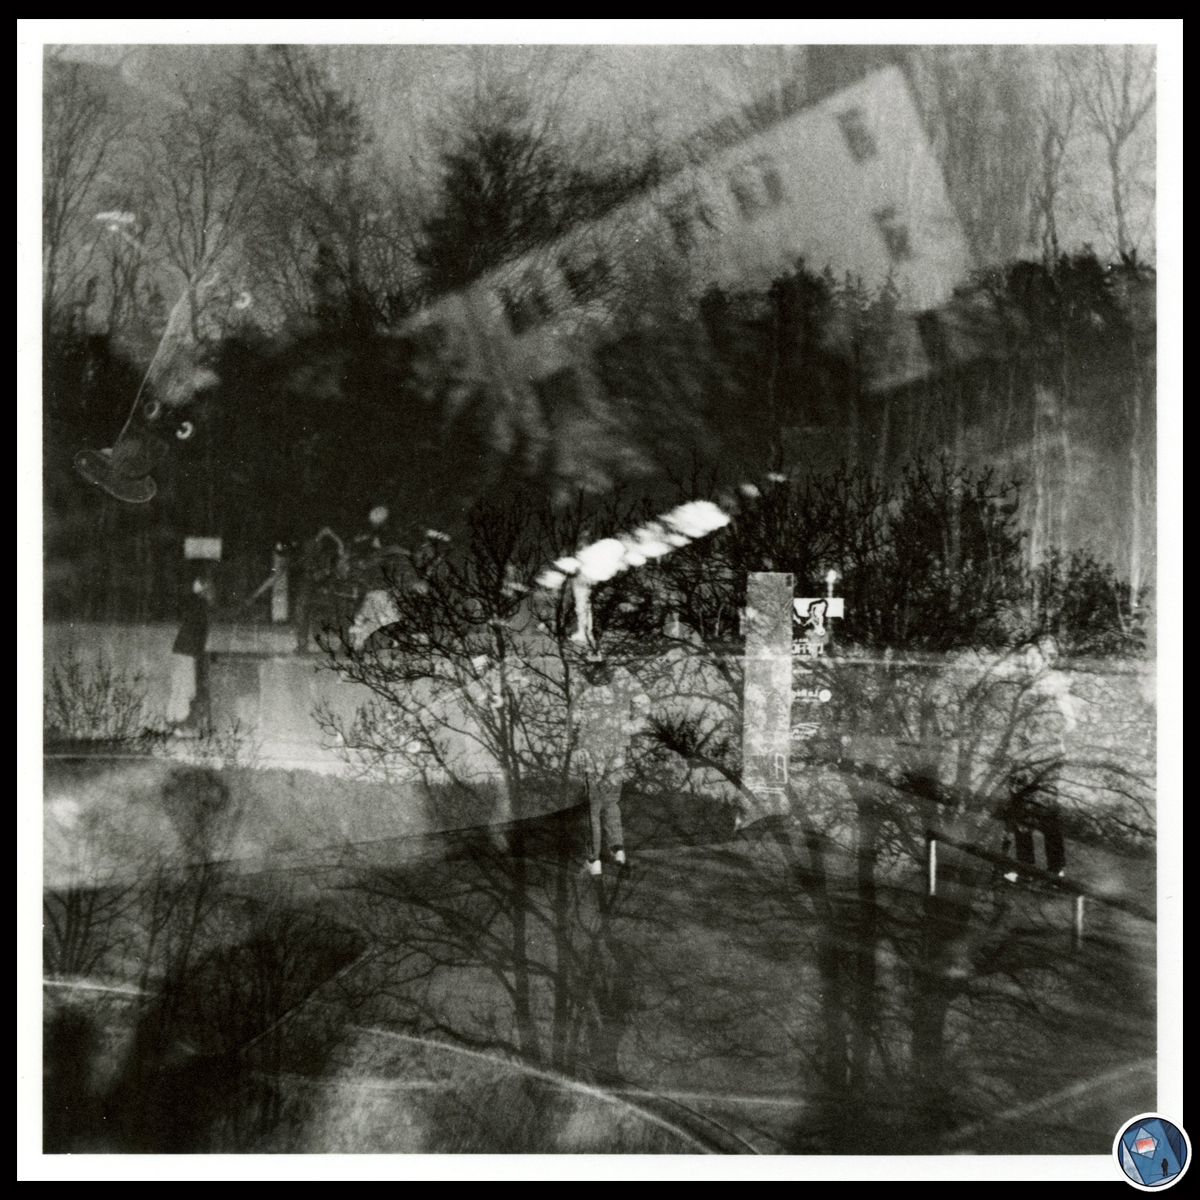 ___Harmless stuff___
+ A problematic shot... +
.
#filmphotography / unintentional multiple exposure
📷 #yashica635 
🎞 #120mmfilm #fomapan100 developed in #caffenol
.
#photography #fineartphotography #fineart_photobw #bnw_captures #believeinfilm #filmisnotdead #darkroom #bnw